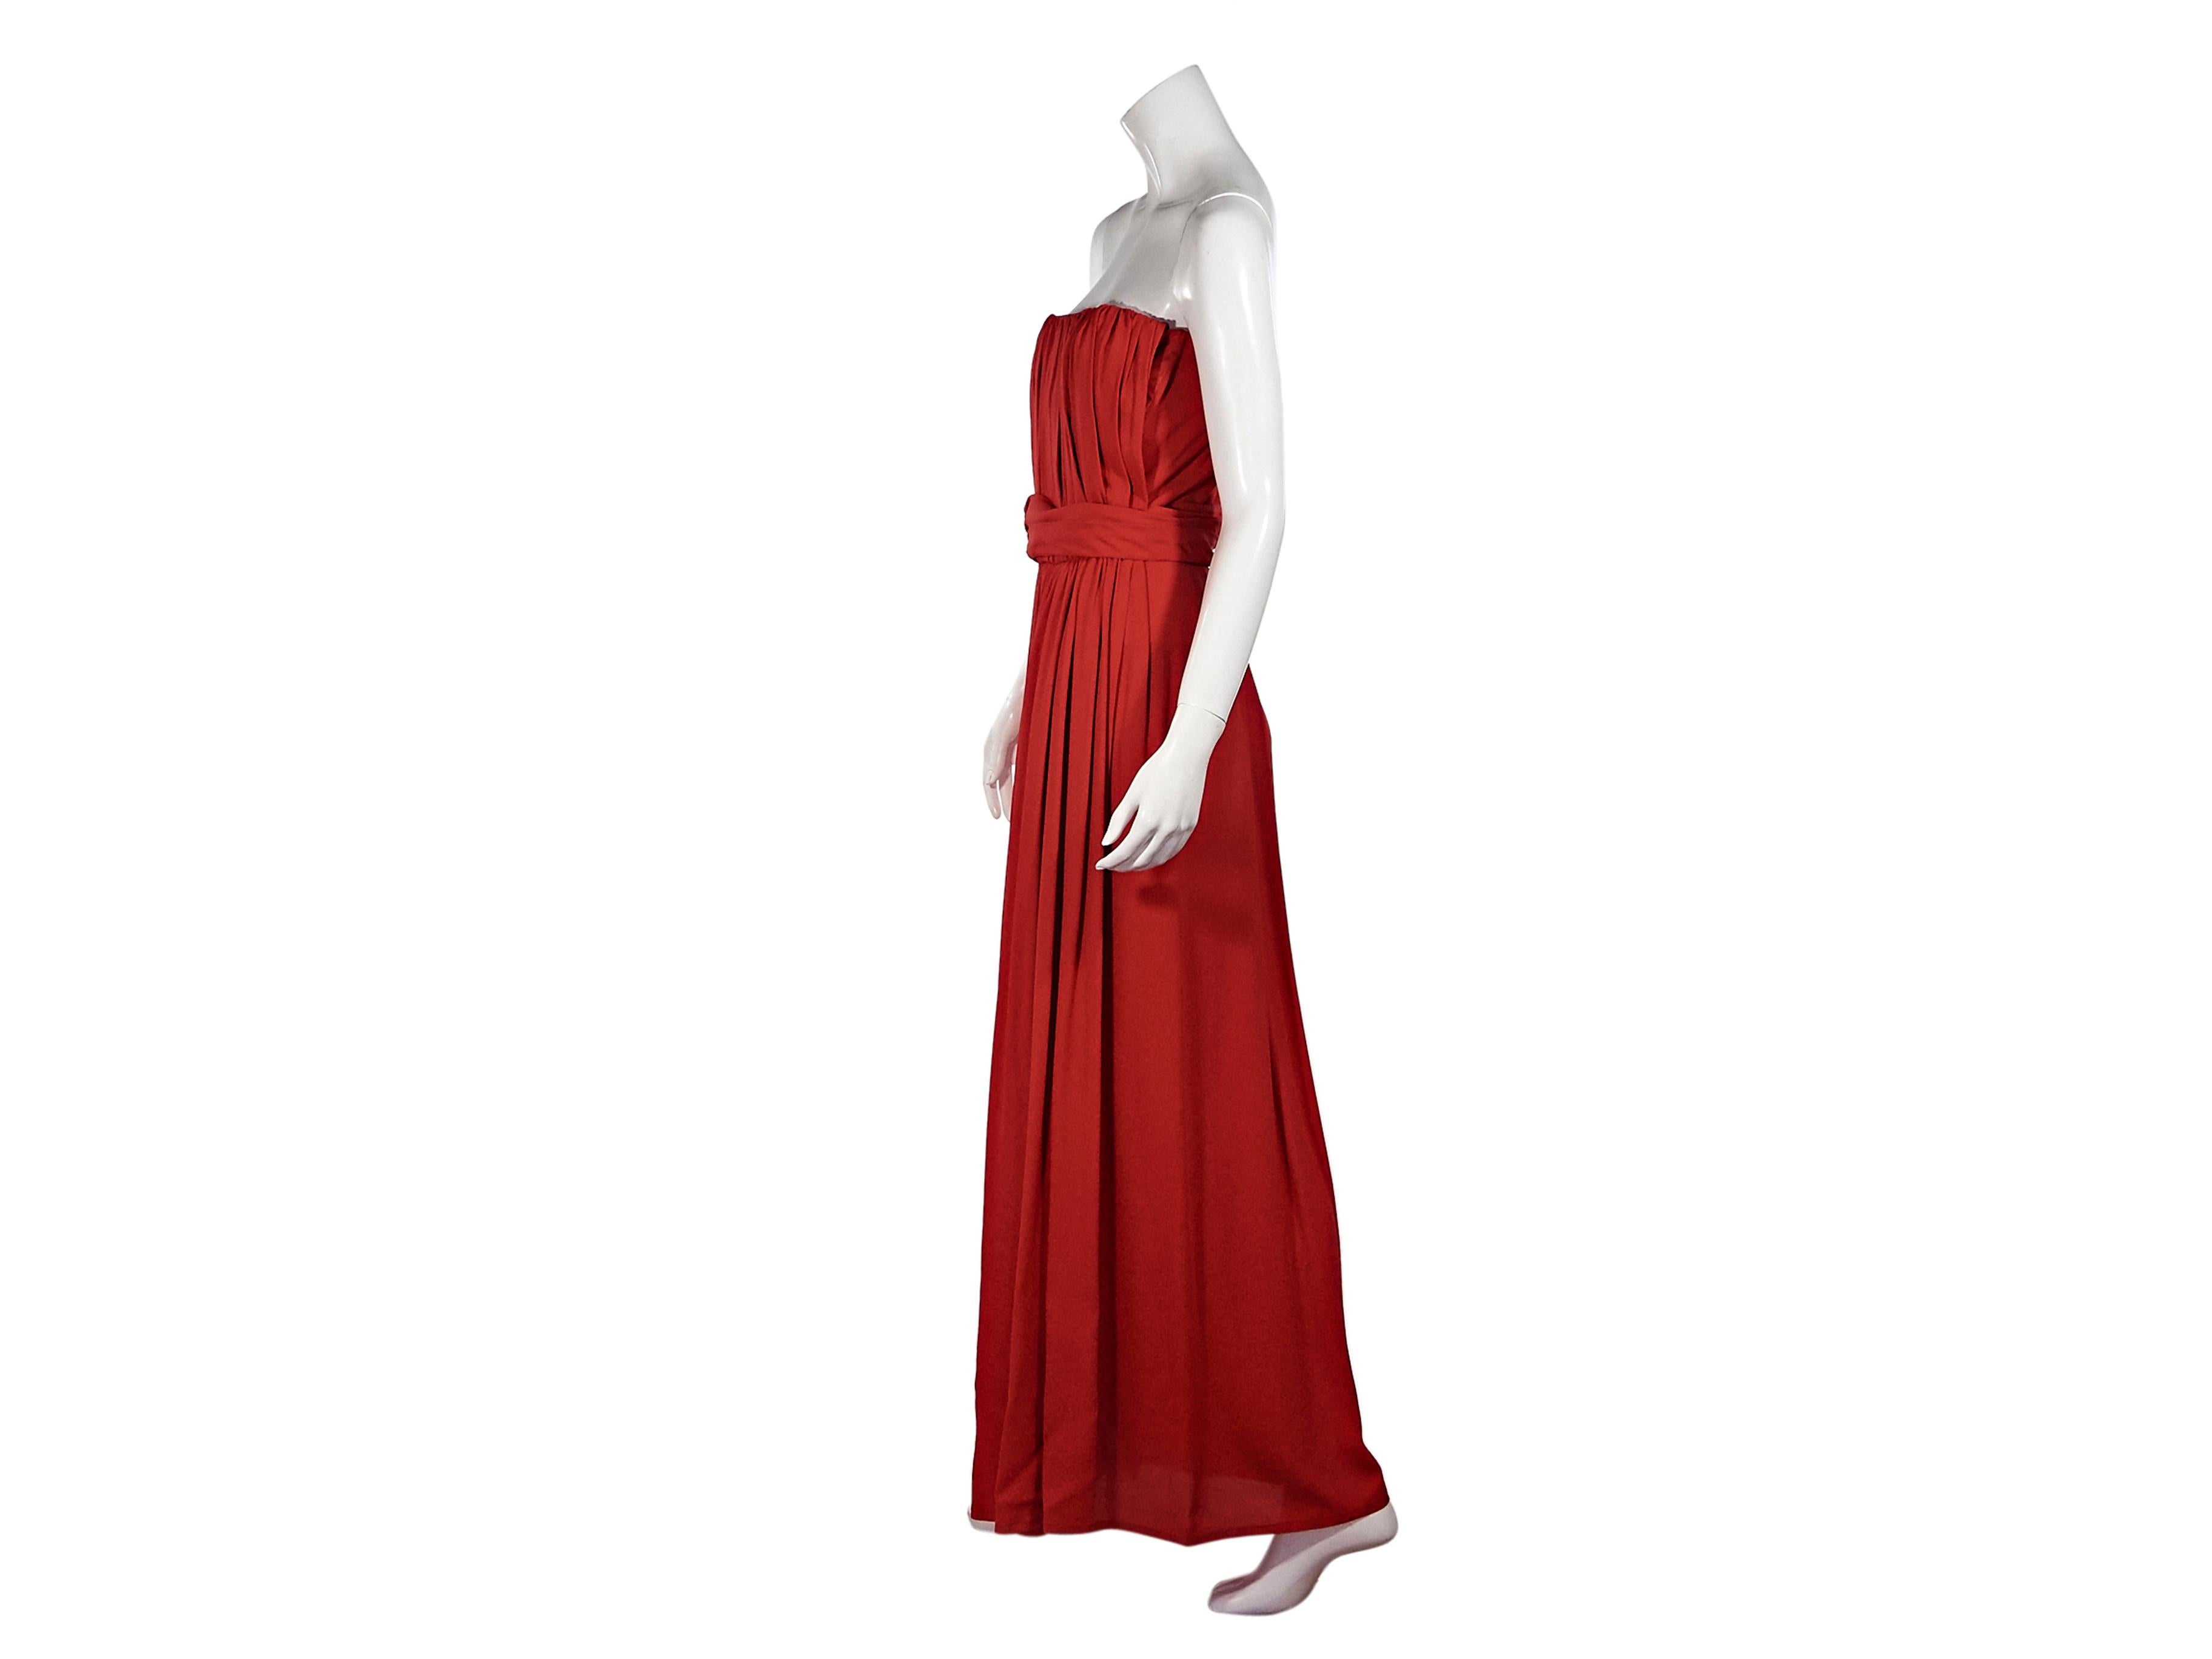 Product details:  Red strapless ruched gown by Yves Saint Laurent.  Banded waist detail.  Concealed side zip closure.  Inset boning and bust band for a structured silhouette.  34